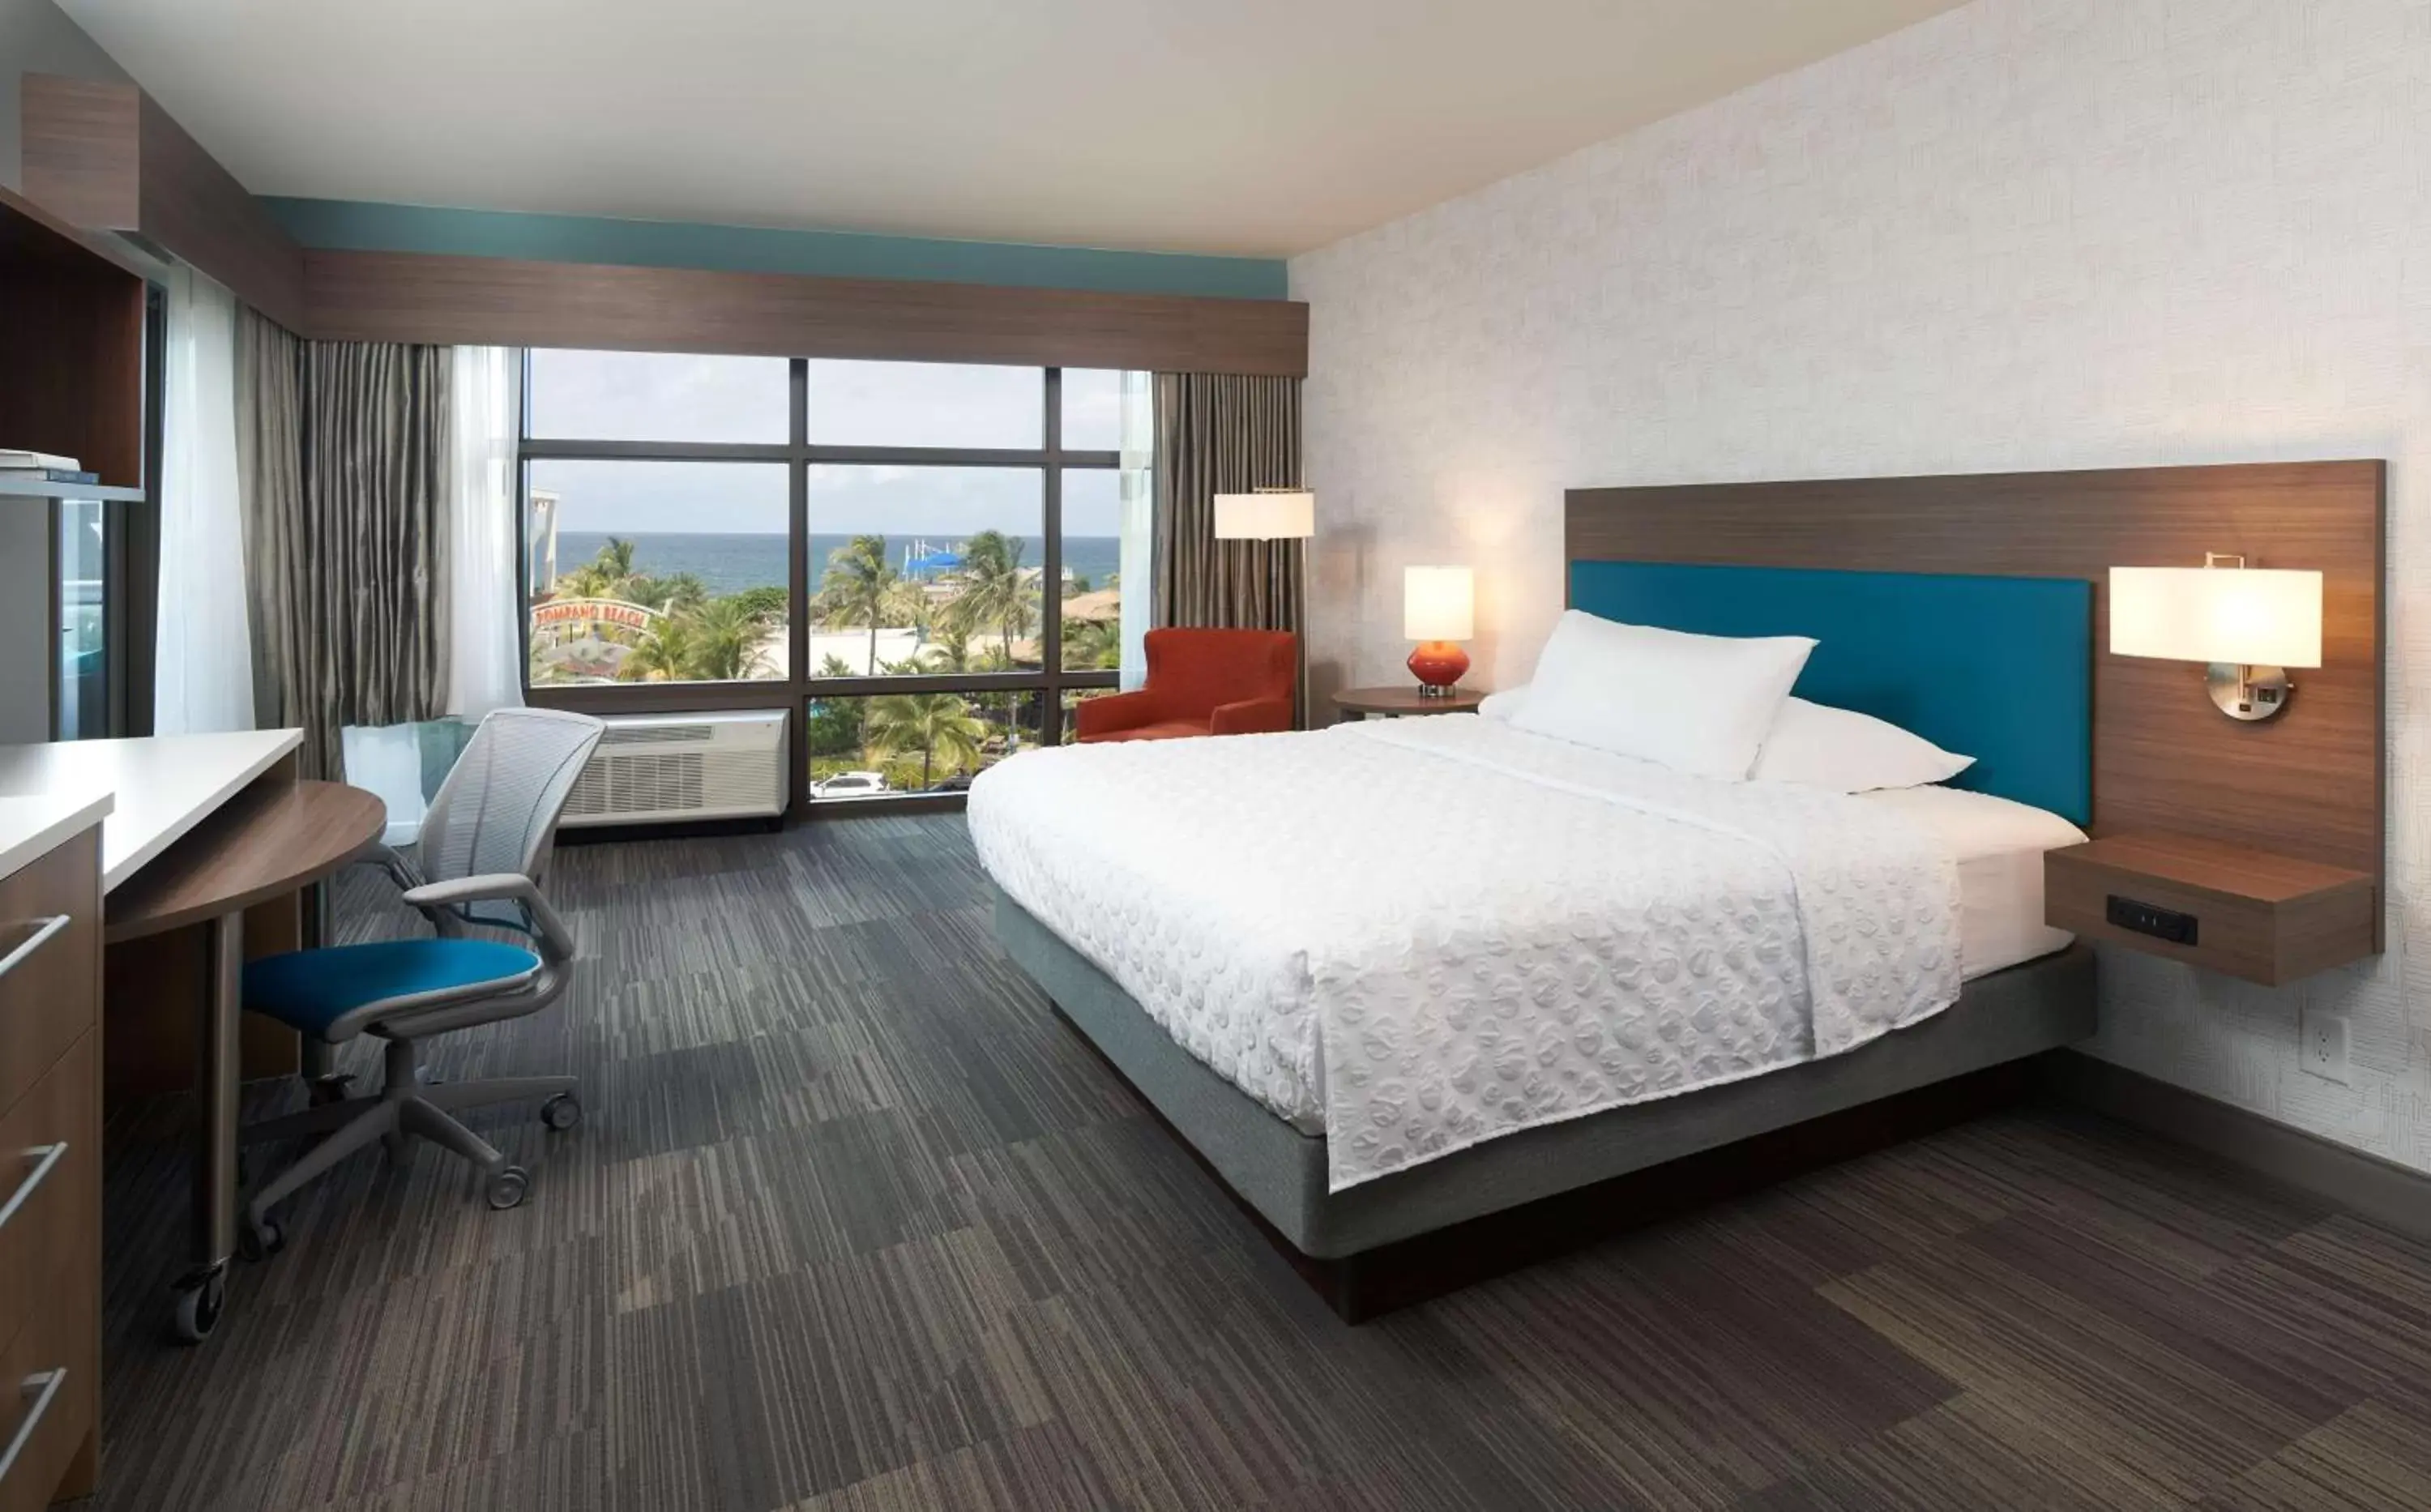 Bedroom in Home2 Suites By Hilton Pompano Beach Pier, Fl